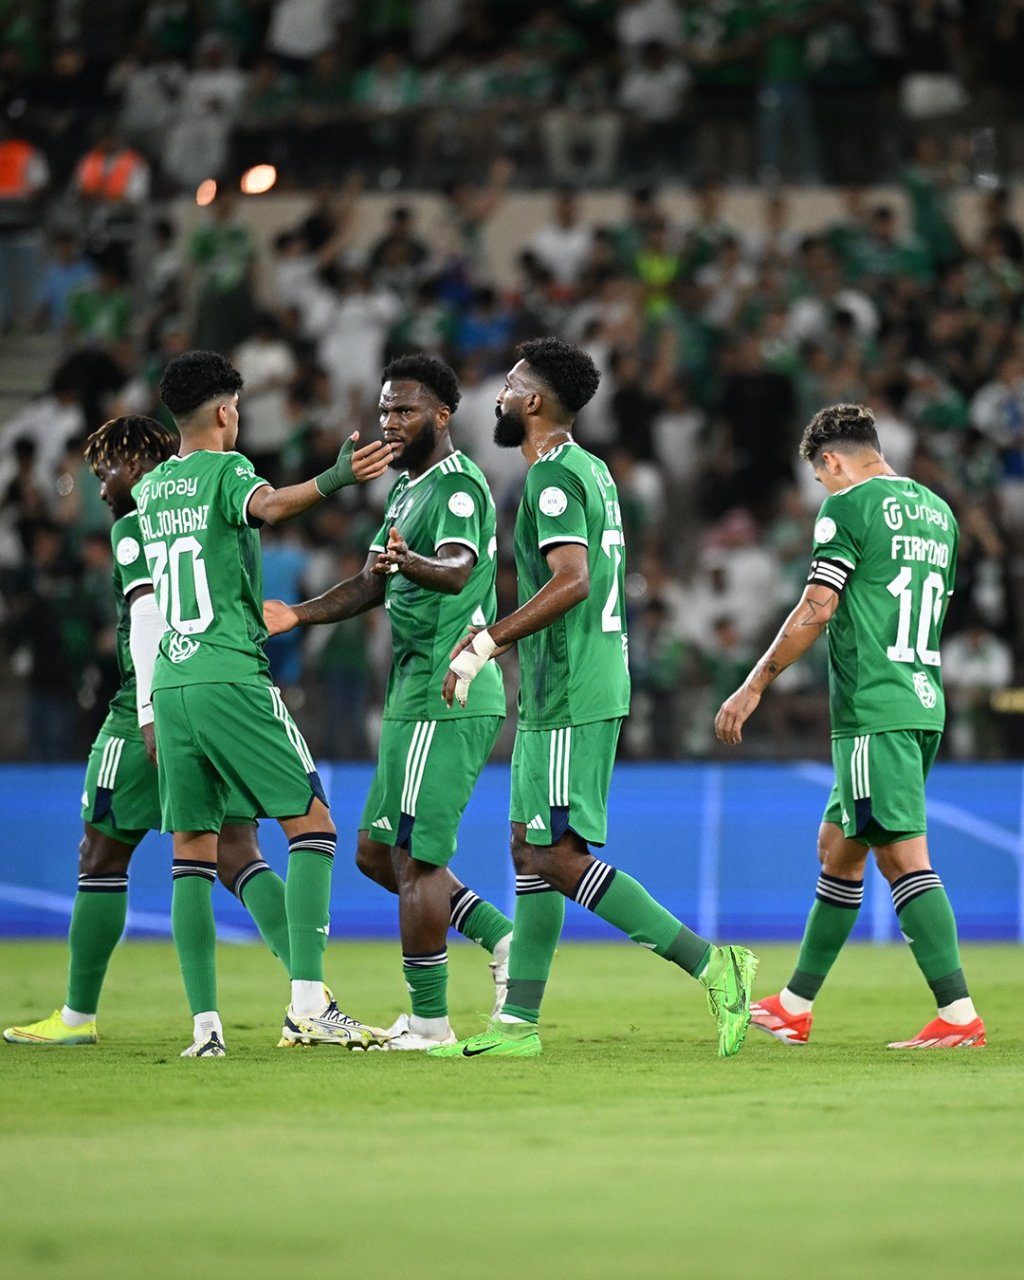 Premier League clubs continue to open way to Al-Ahli for Osimhen